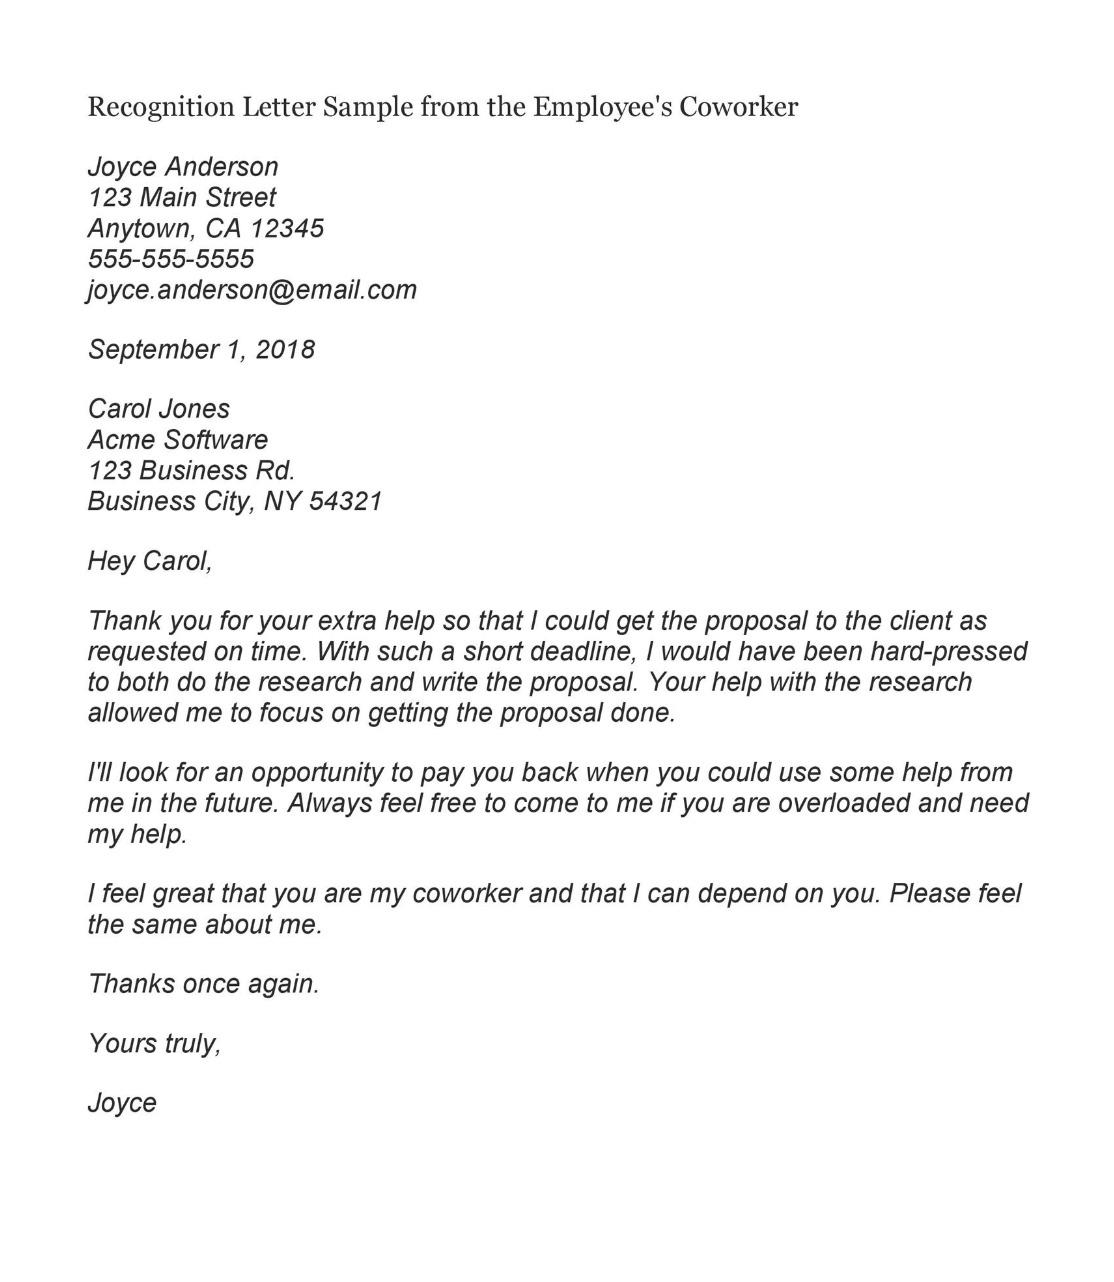 sample recognition letter form employee